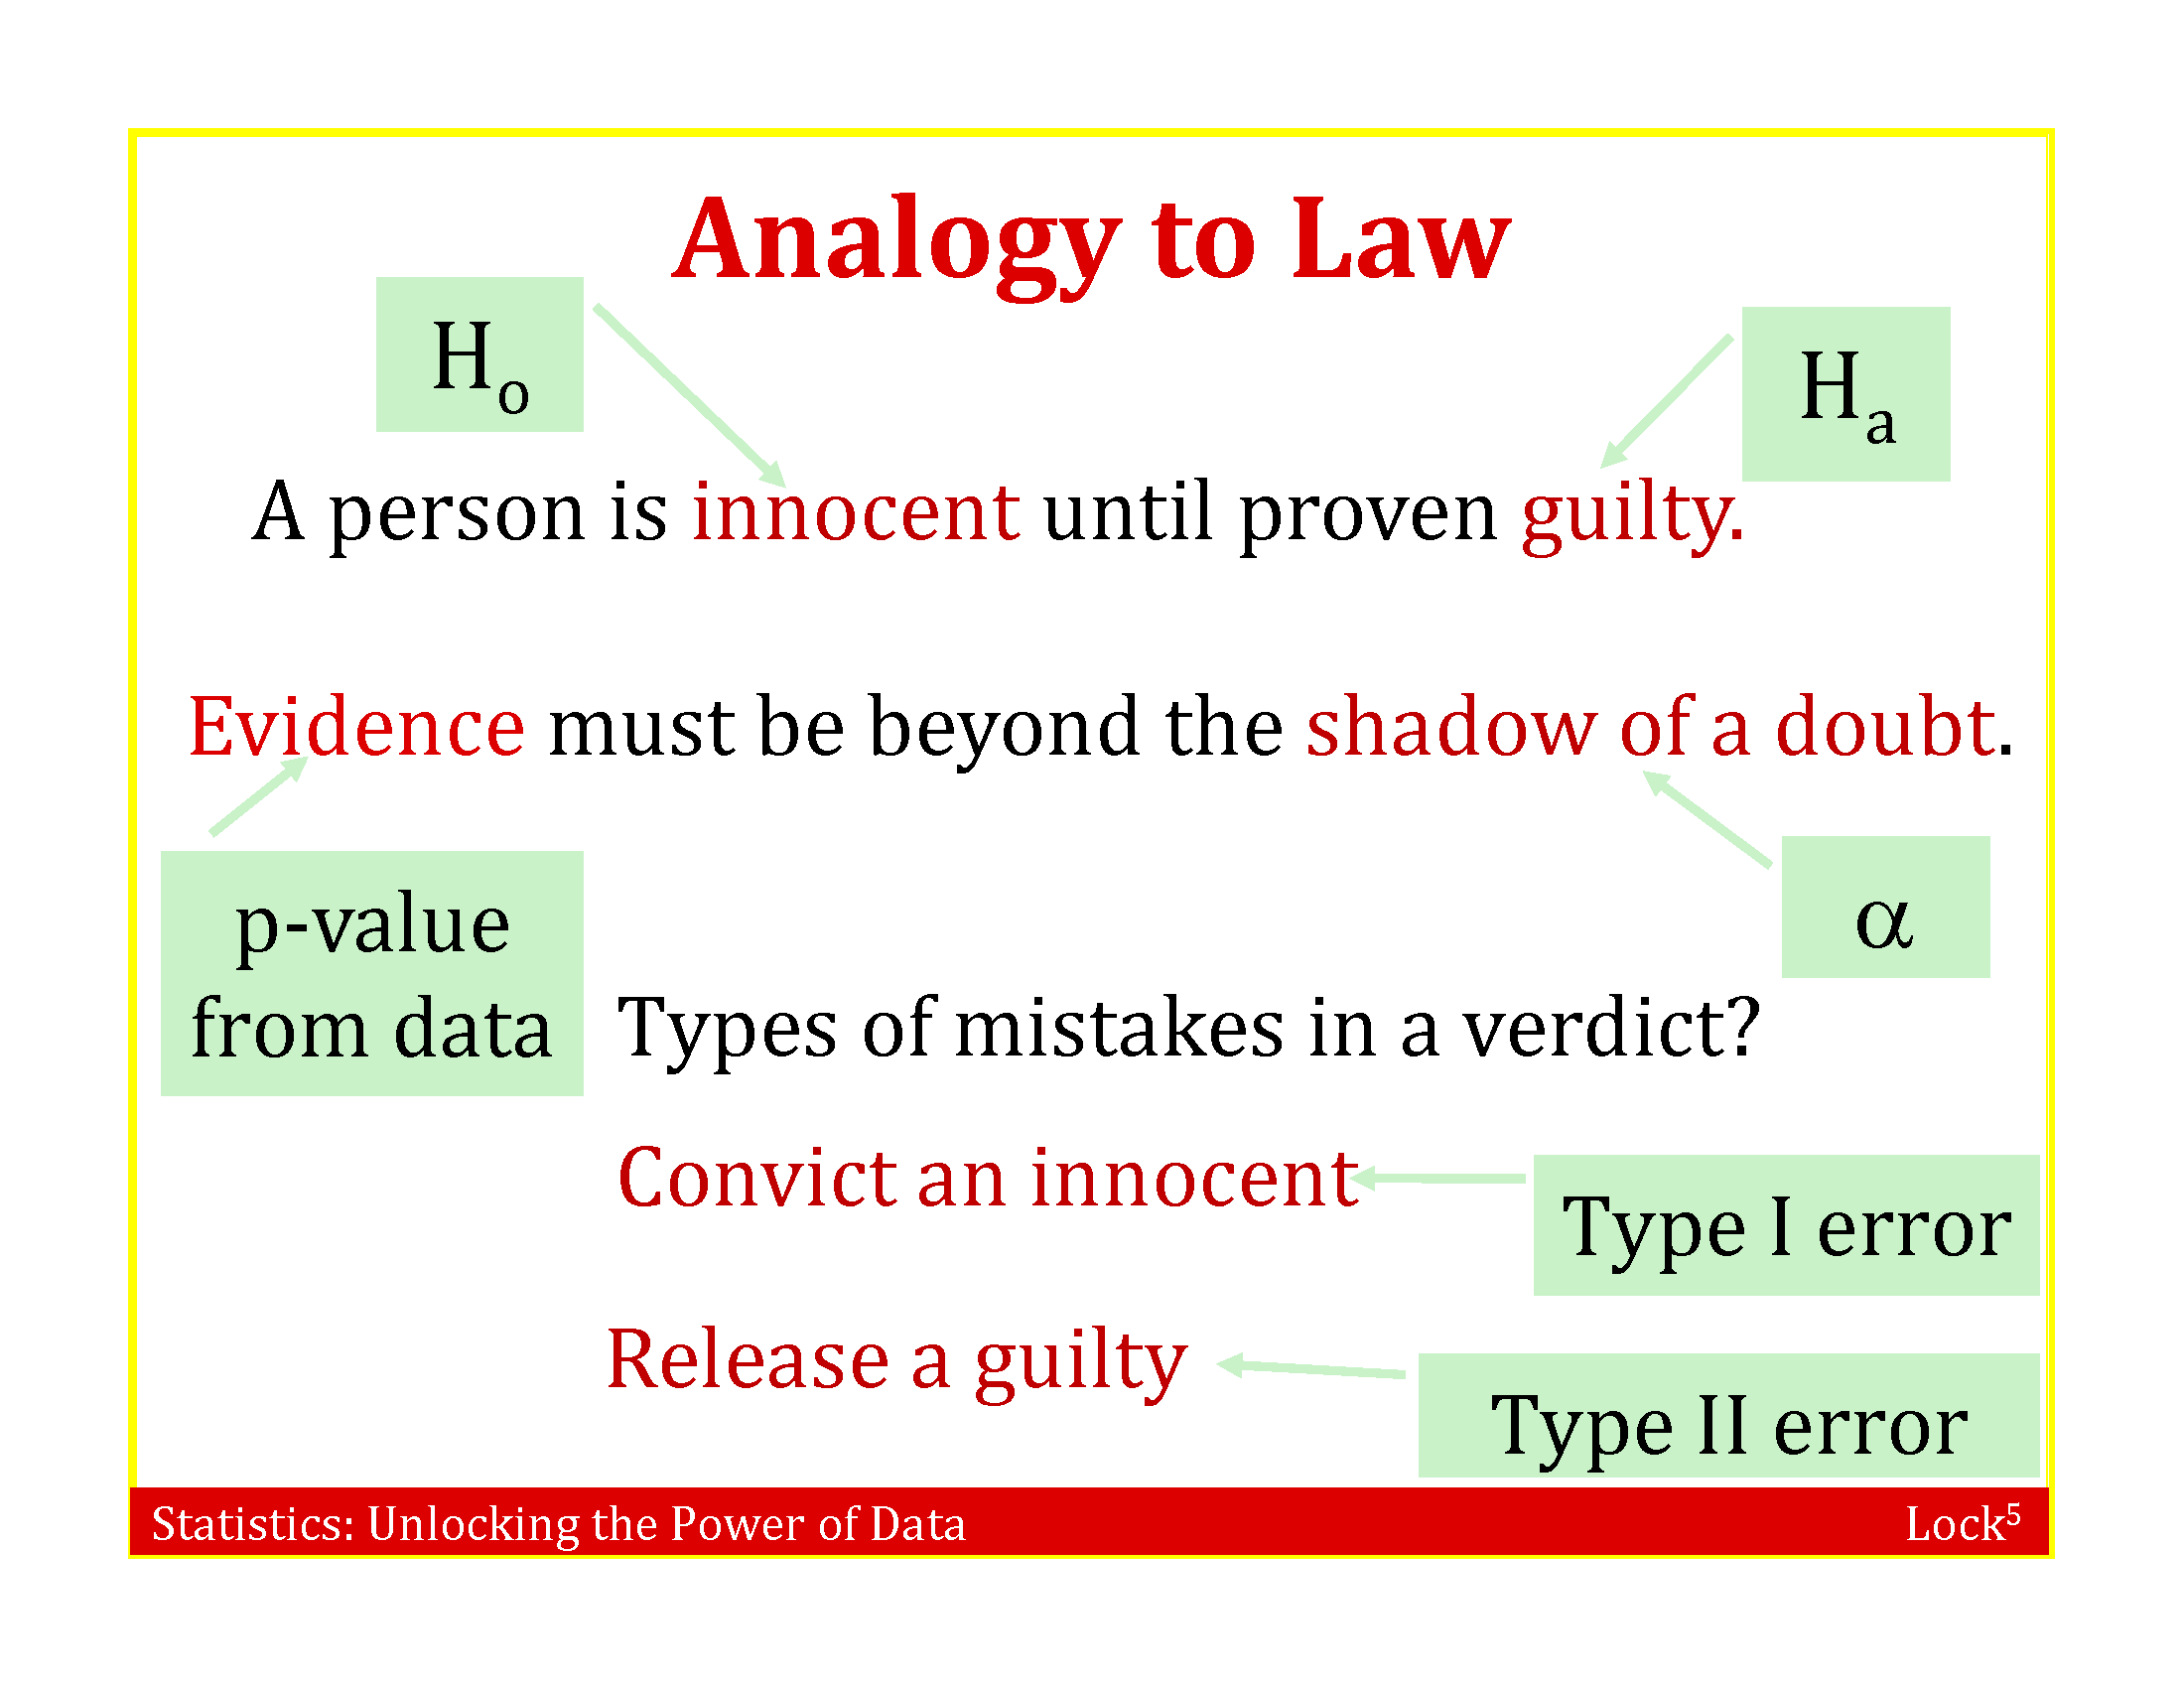 Slide accompanying the textbook, R. H. Lock et al. (2020), that makes the analogy between Null Hypothesis testing and decisions in a court of law.